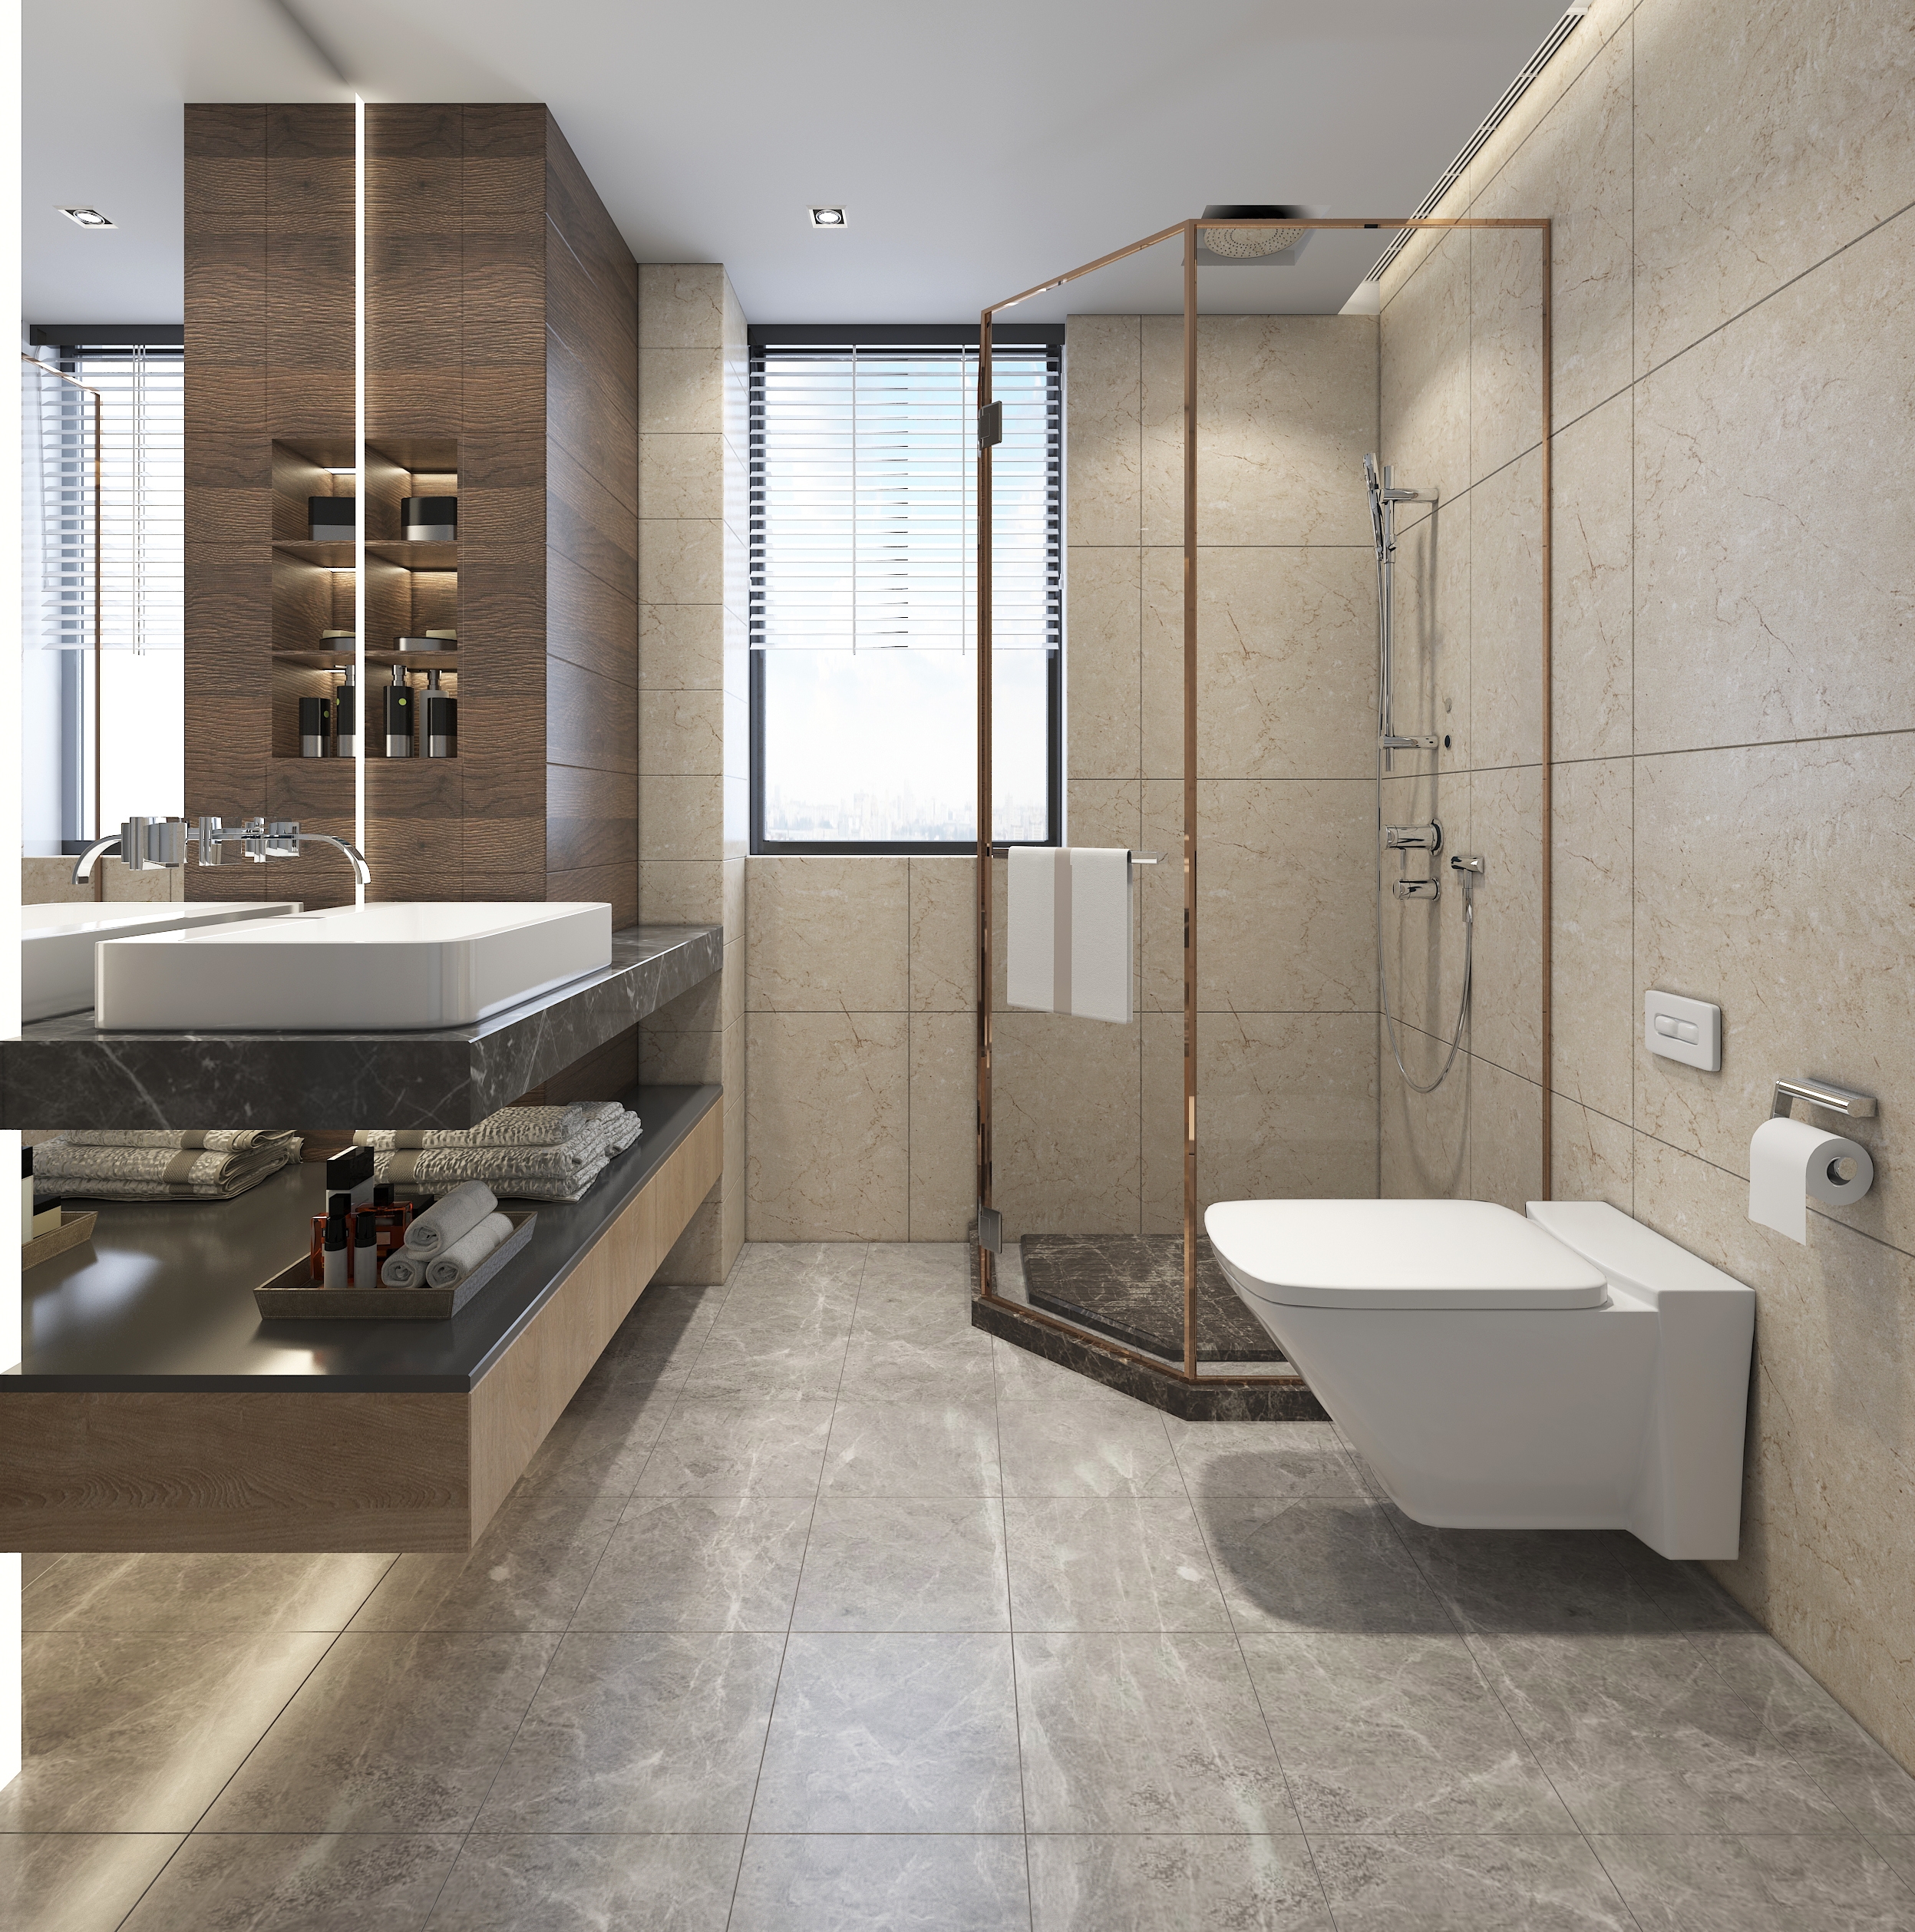 Contemporary bathroom flooring combines elegance and practicality, creating a stylish and efficient space for modern living.